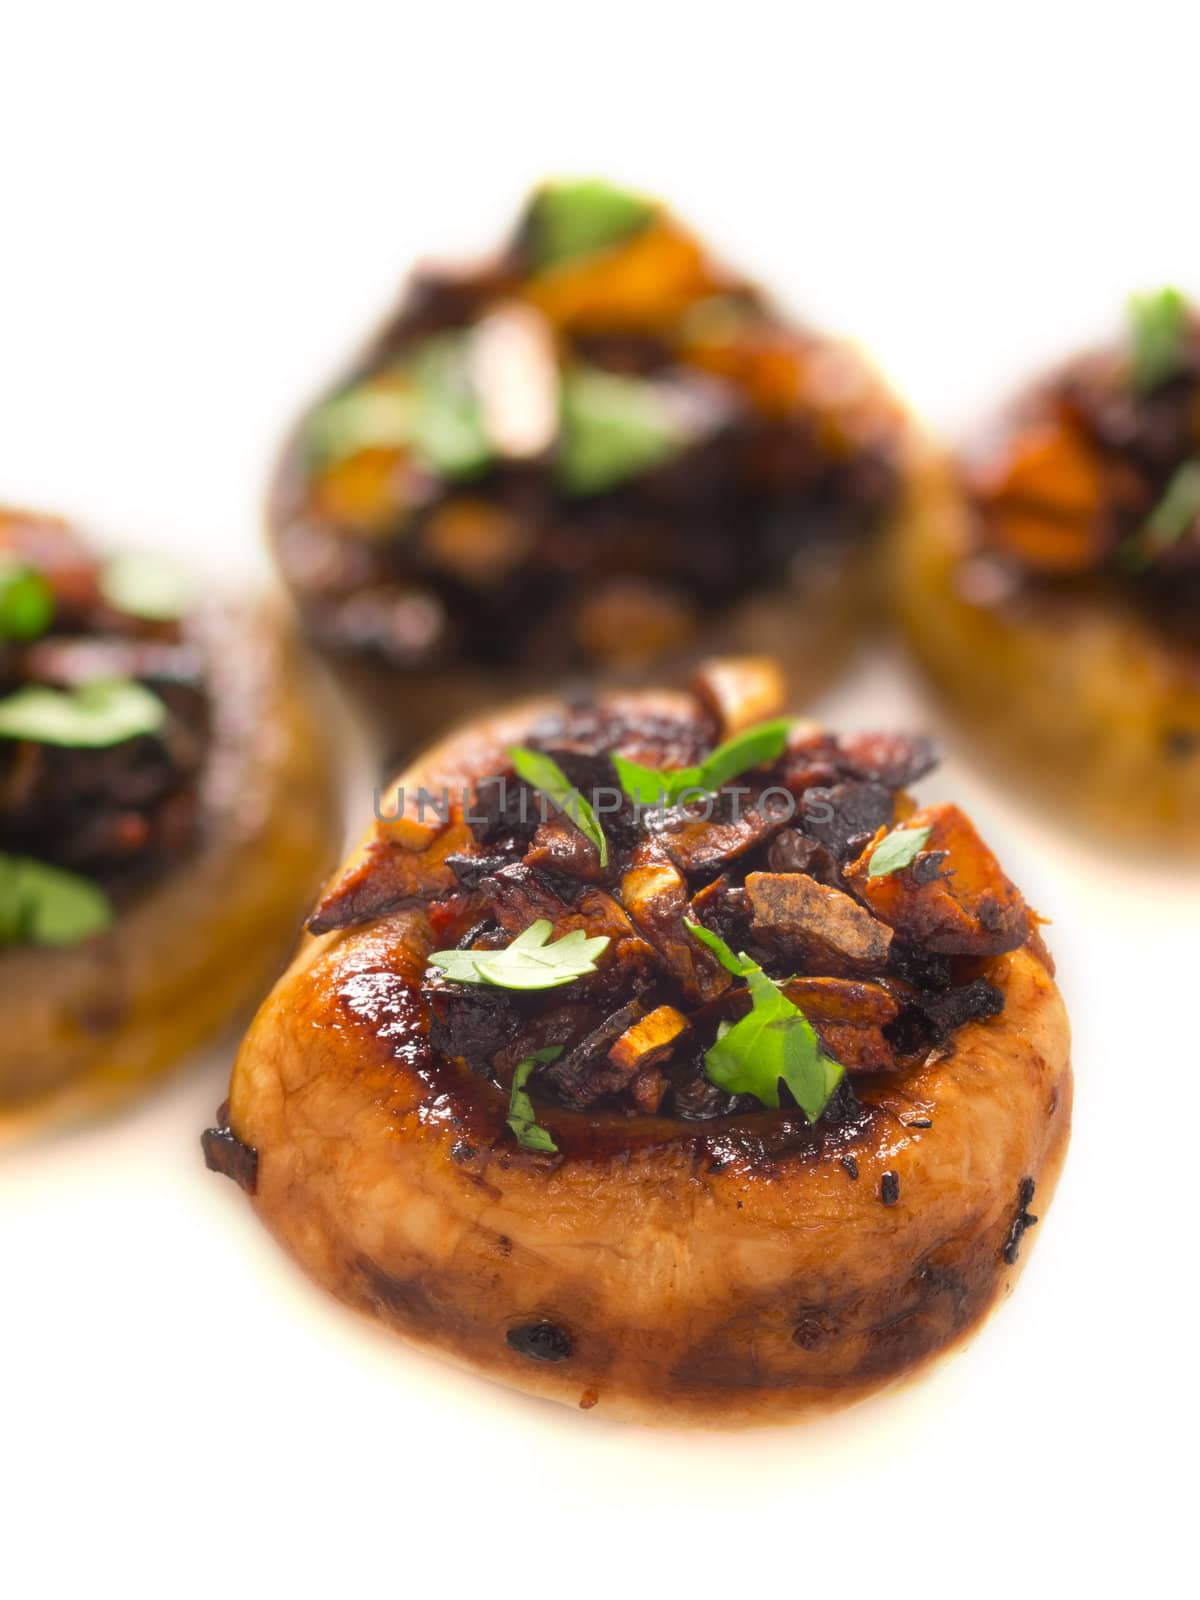 sauteed button mushrooms by zkruger